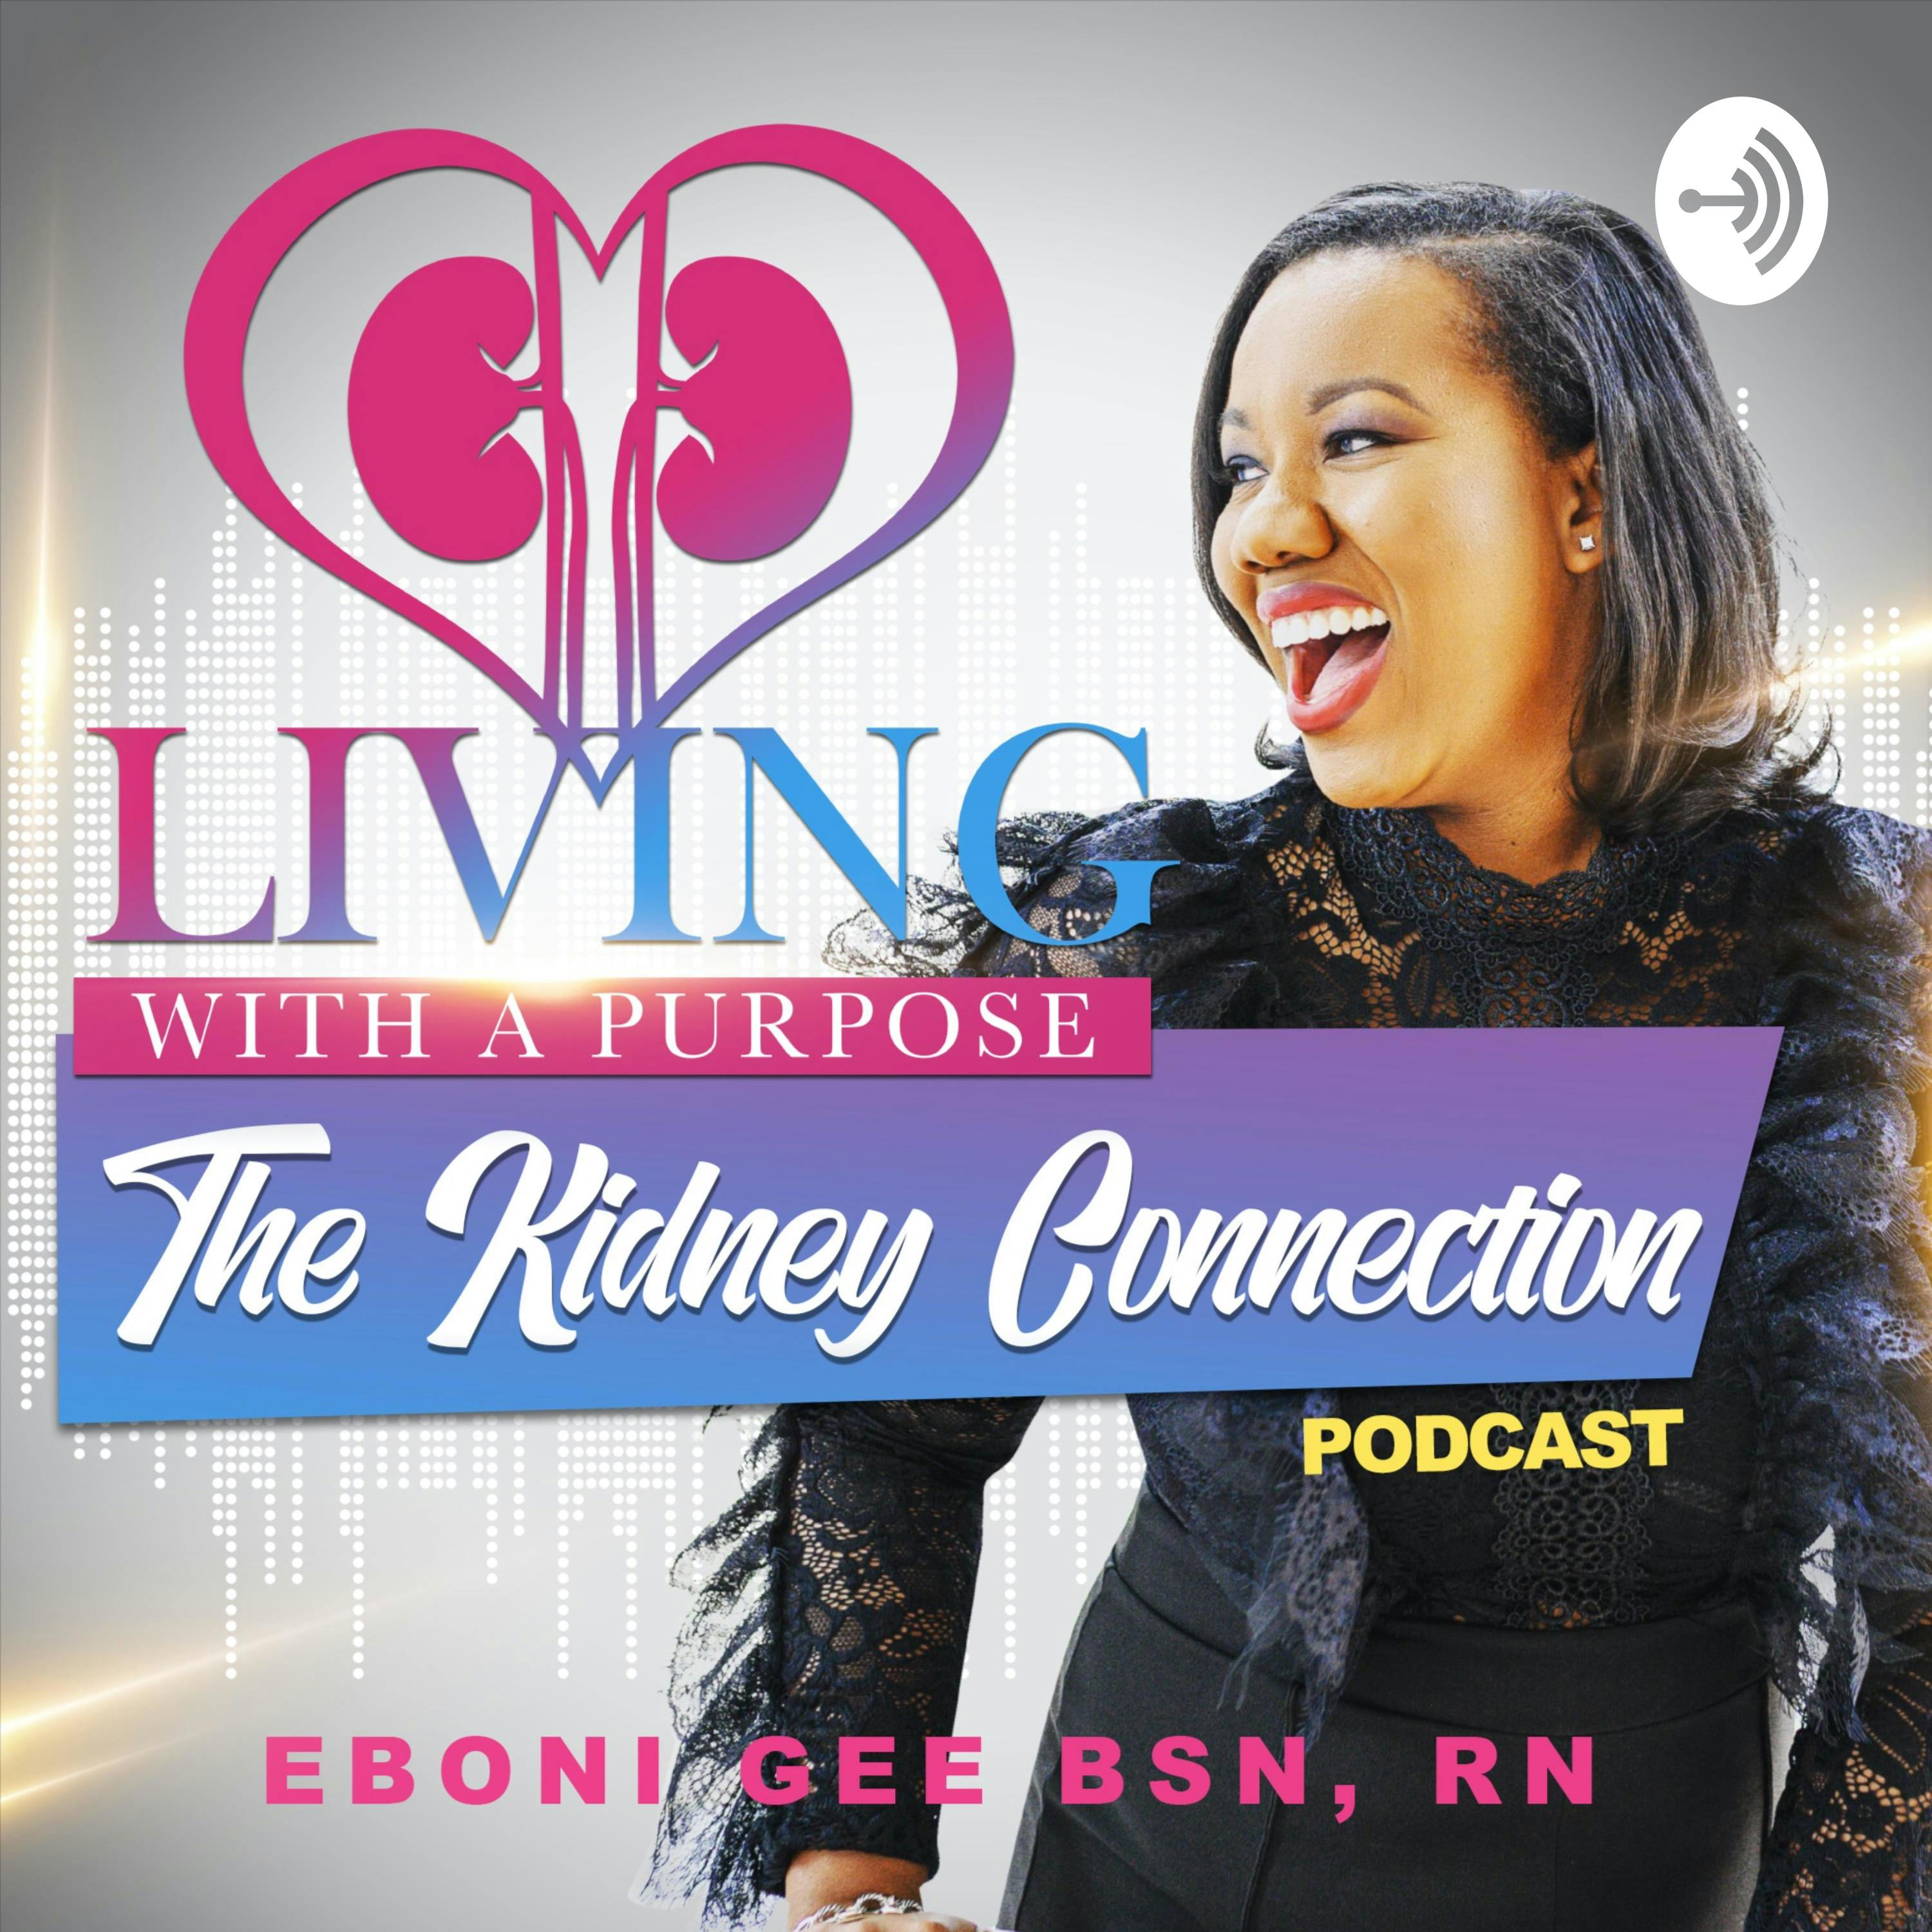 Episode 101: The Importance of Knowing Your Why with Beverly Johnson